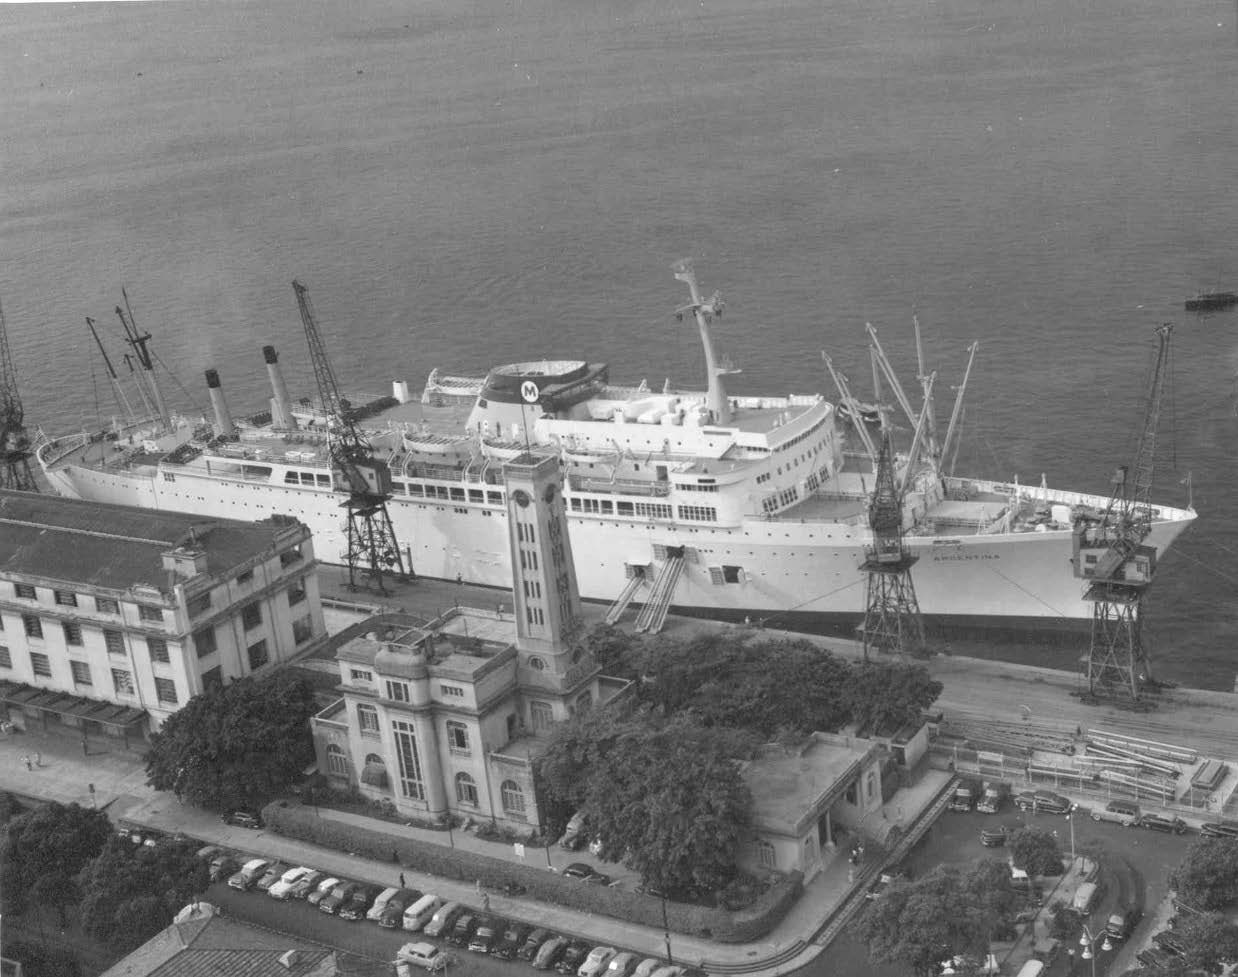 SS Argentina at dock in Rio de Janeiro, Brazil. Courtesy of Moore-McCormack.